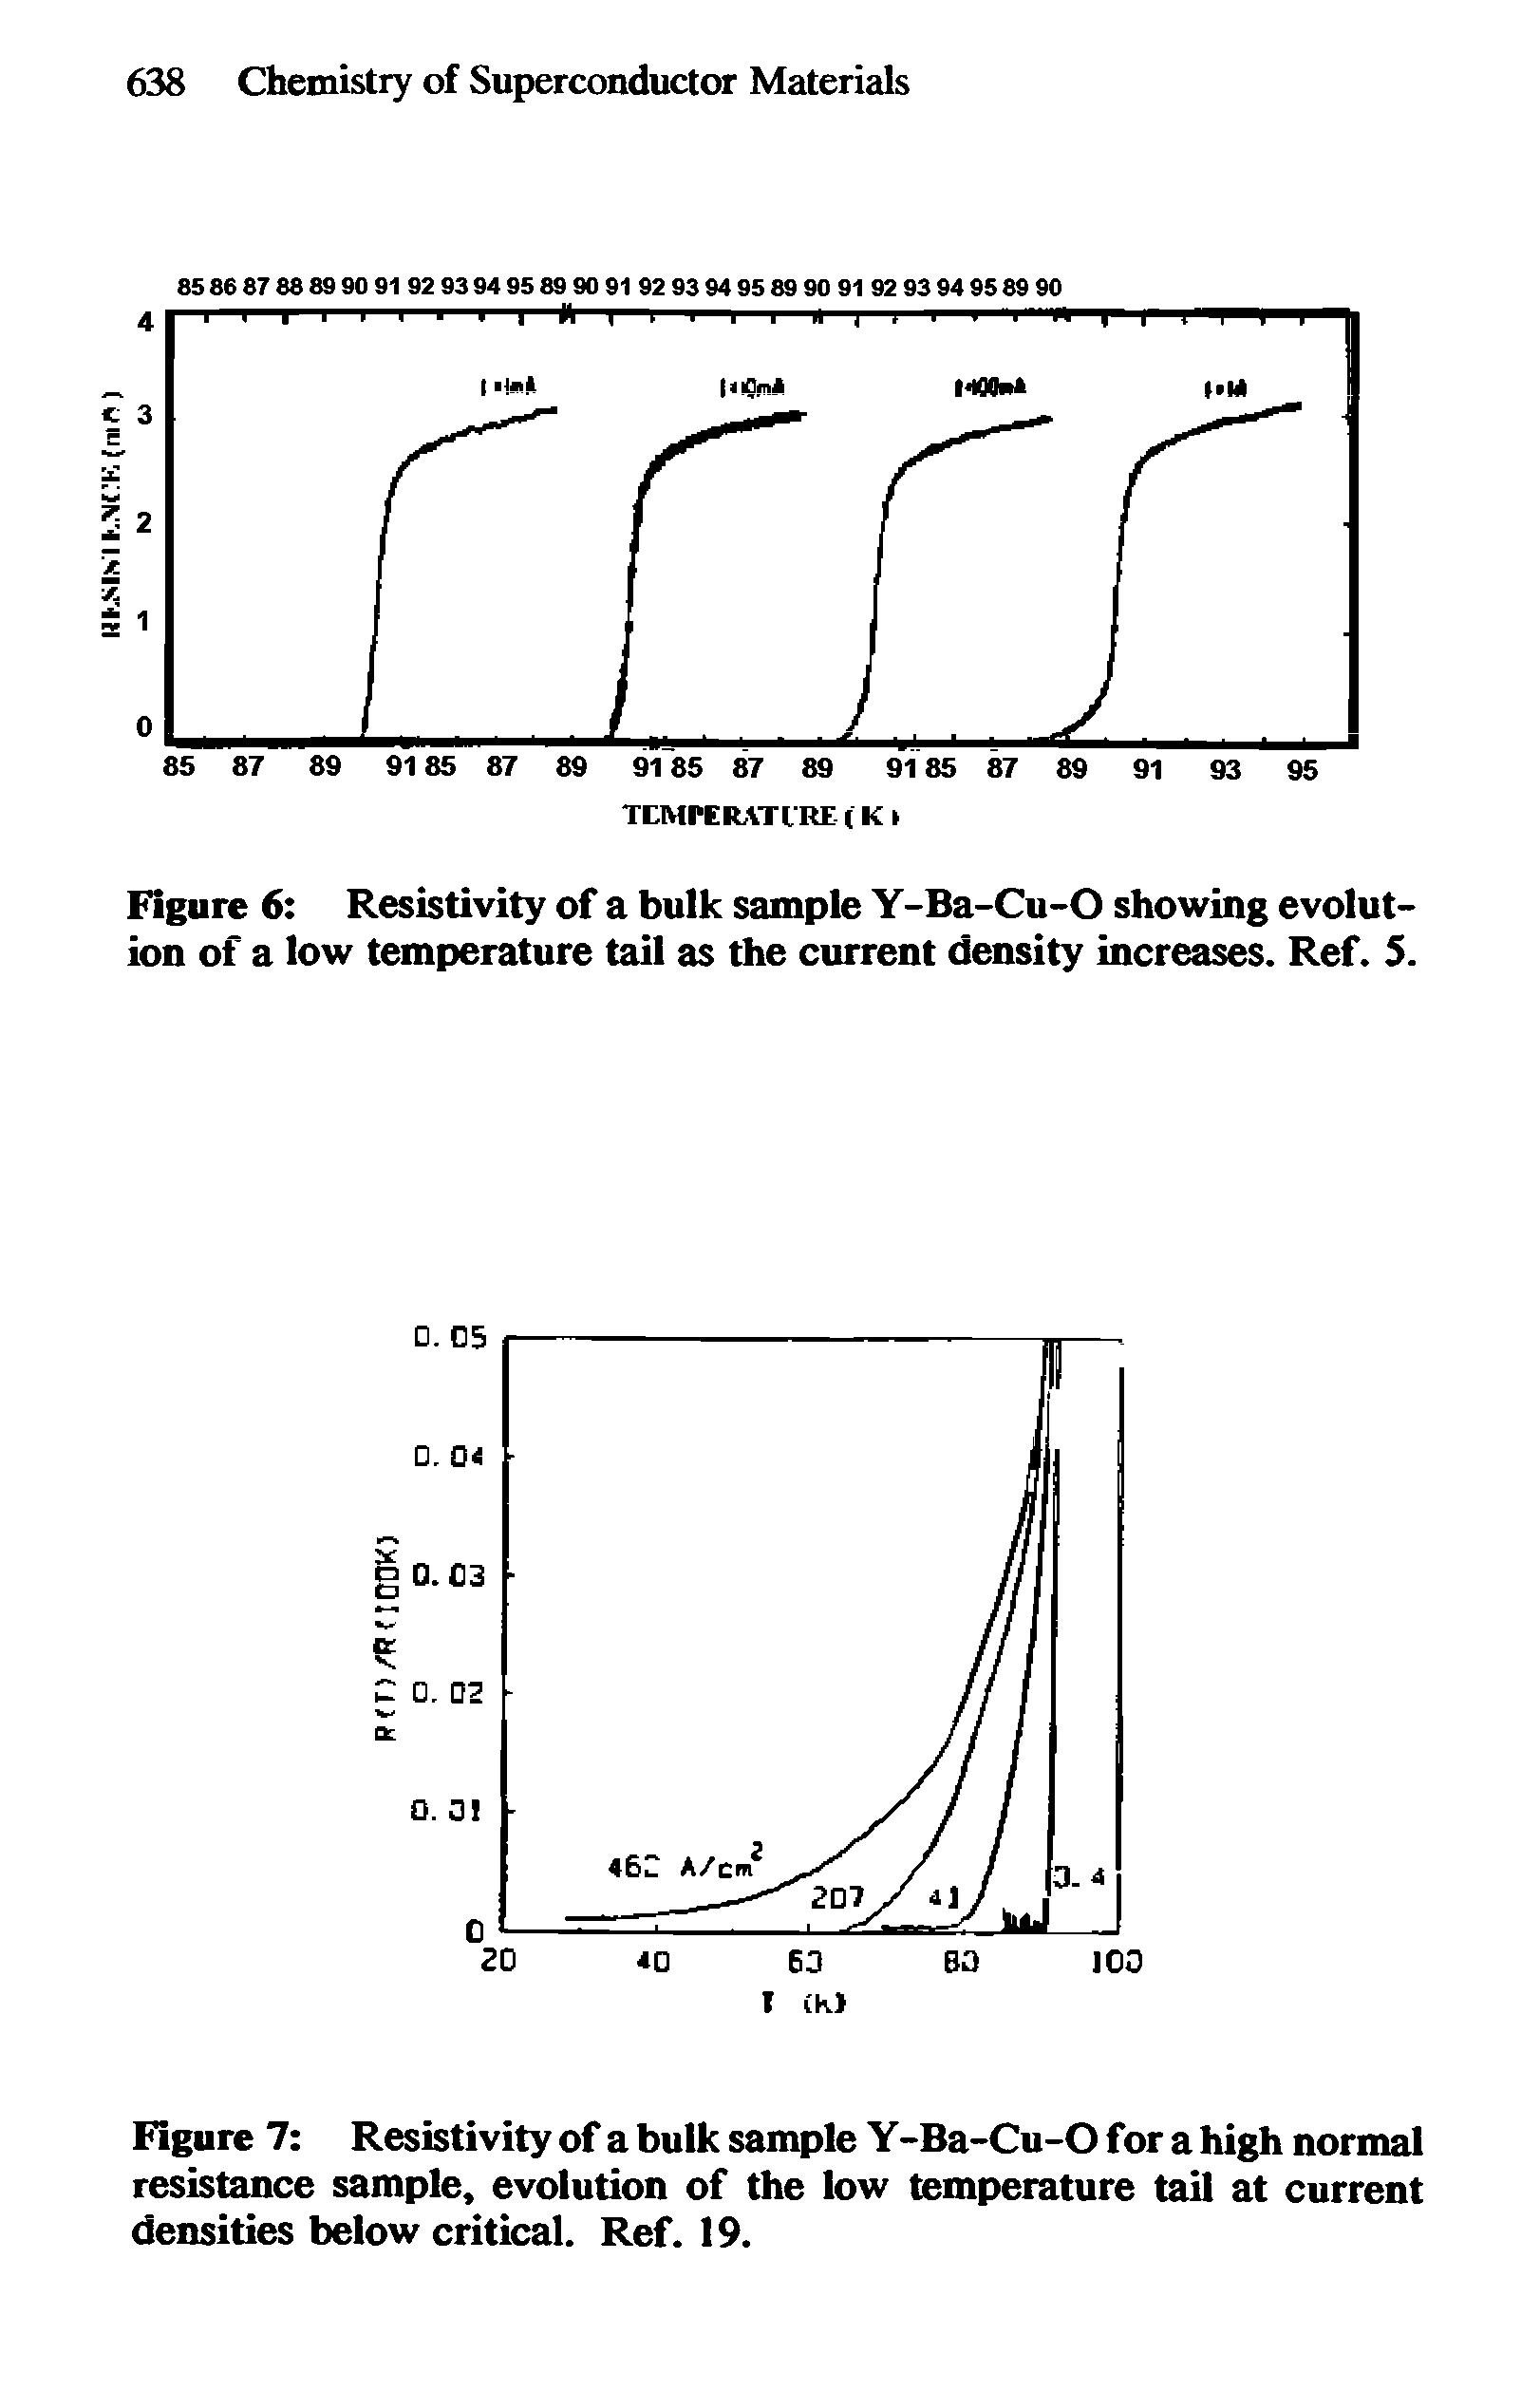 Figure 6 Resistivity of a bulk sample Y-Ba-Cu-O showing evolution of a low temperature tail as the current density increases. Ref. 5.